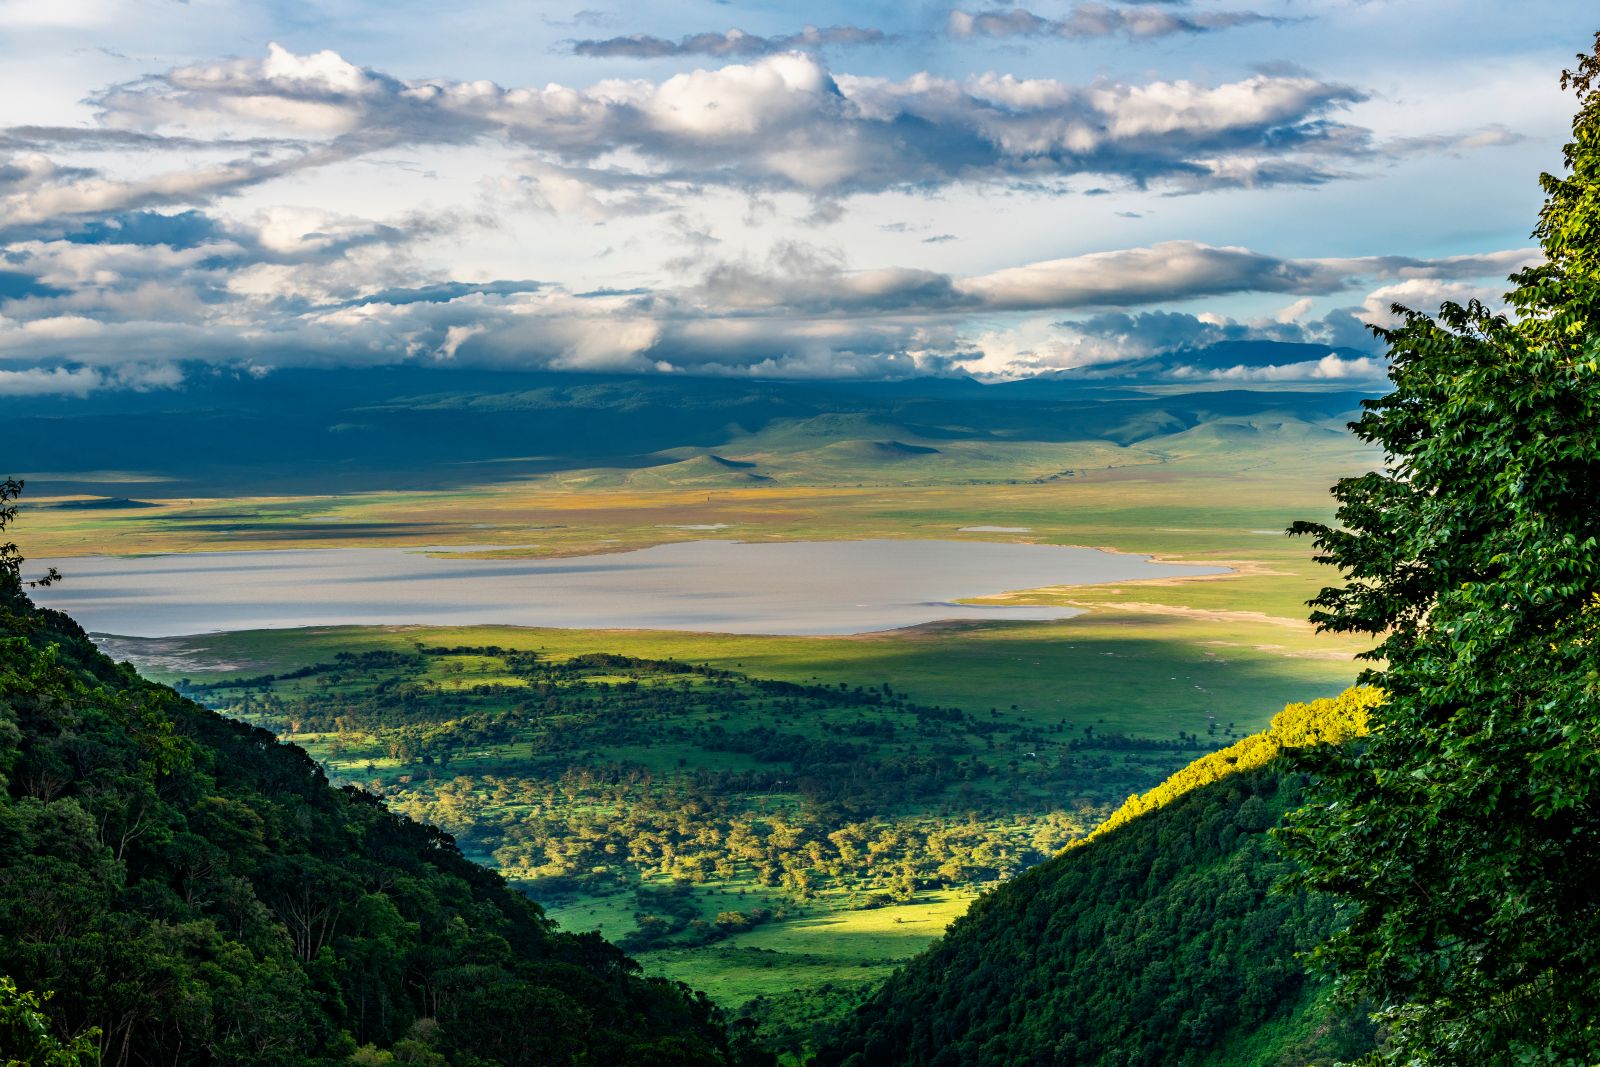 Looking down over the Ngorogoro Crater in Tanzania